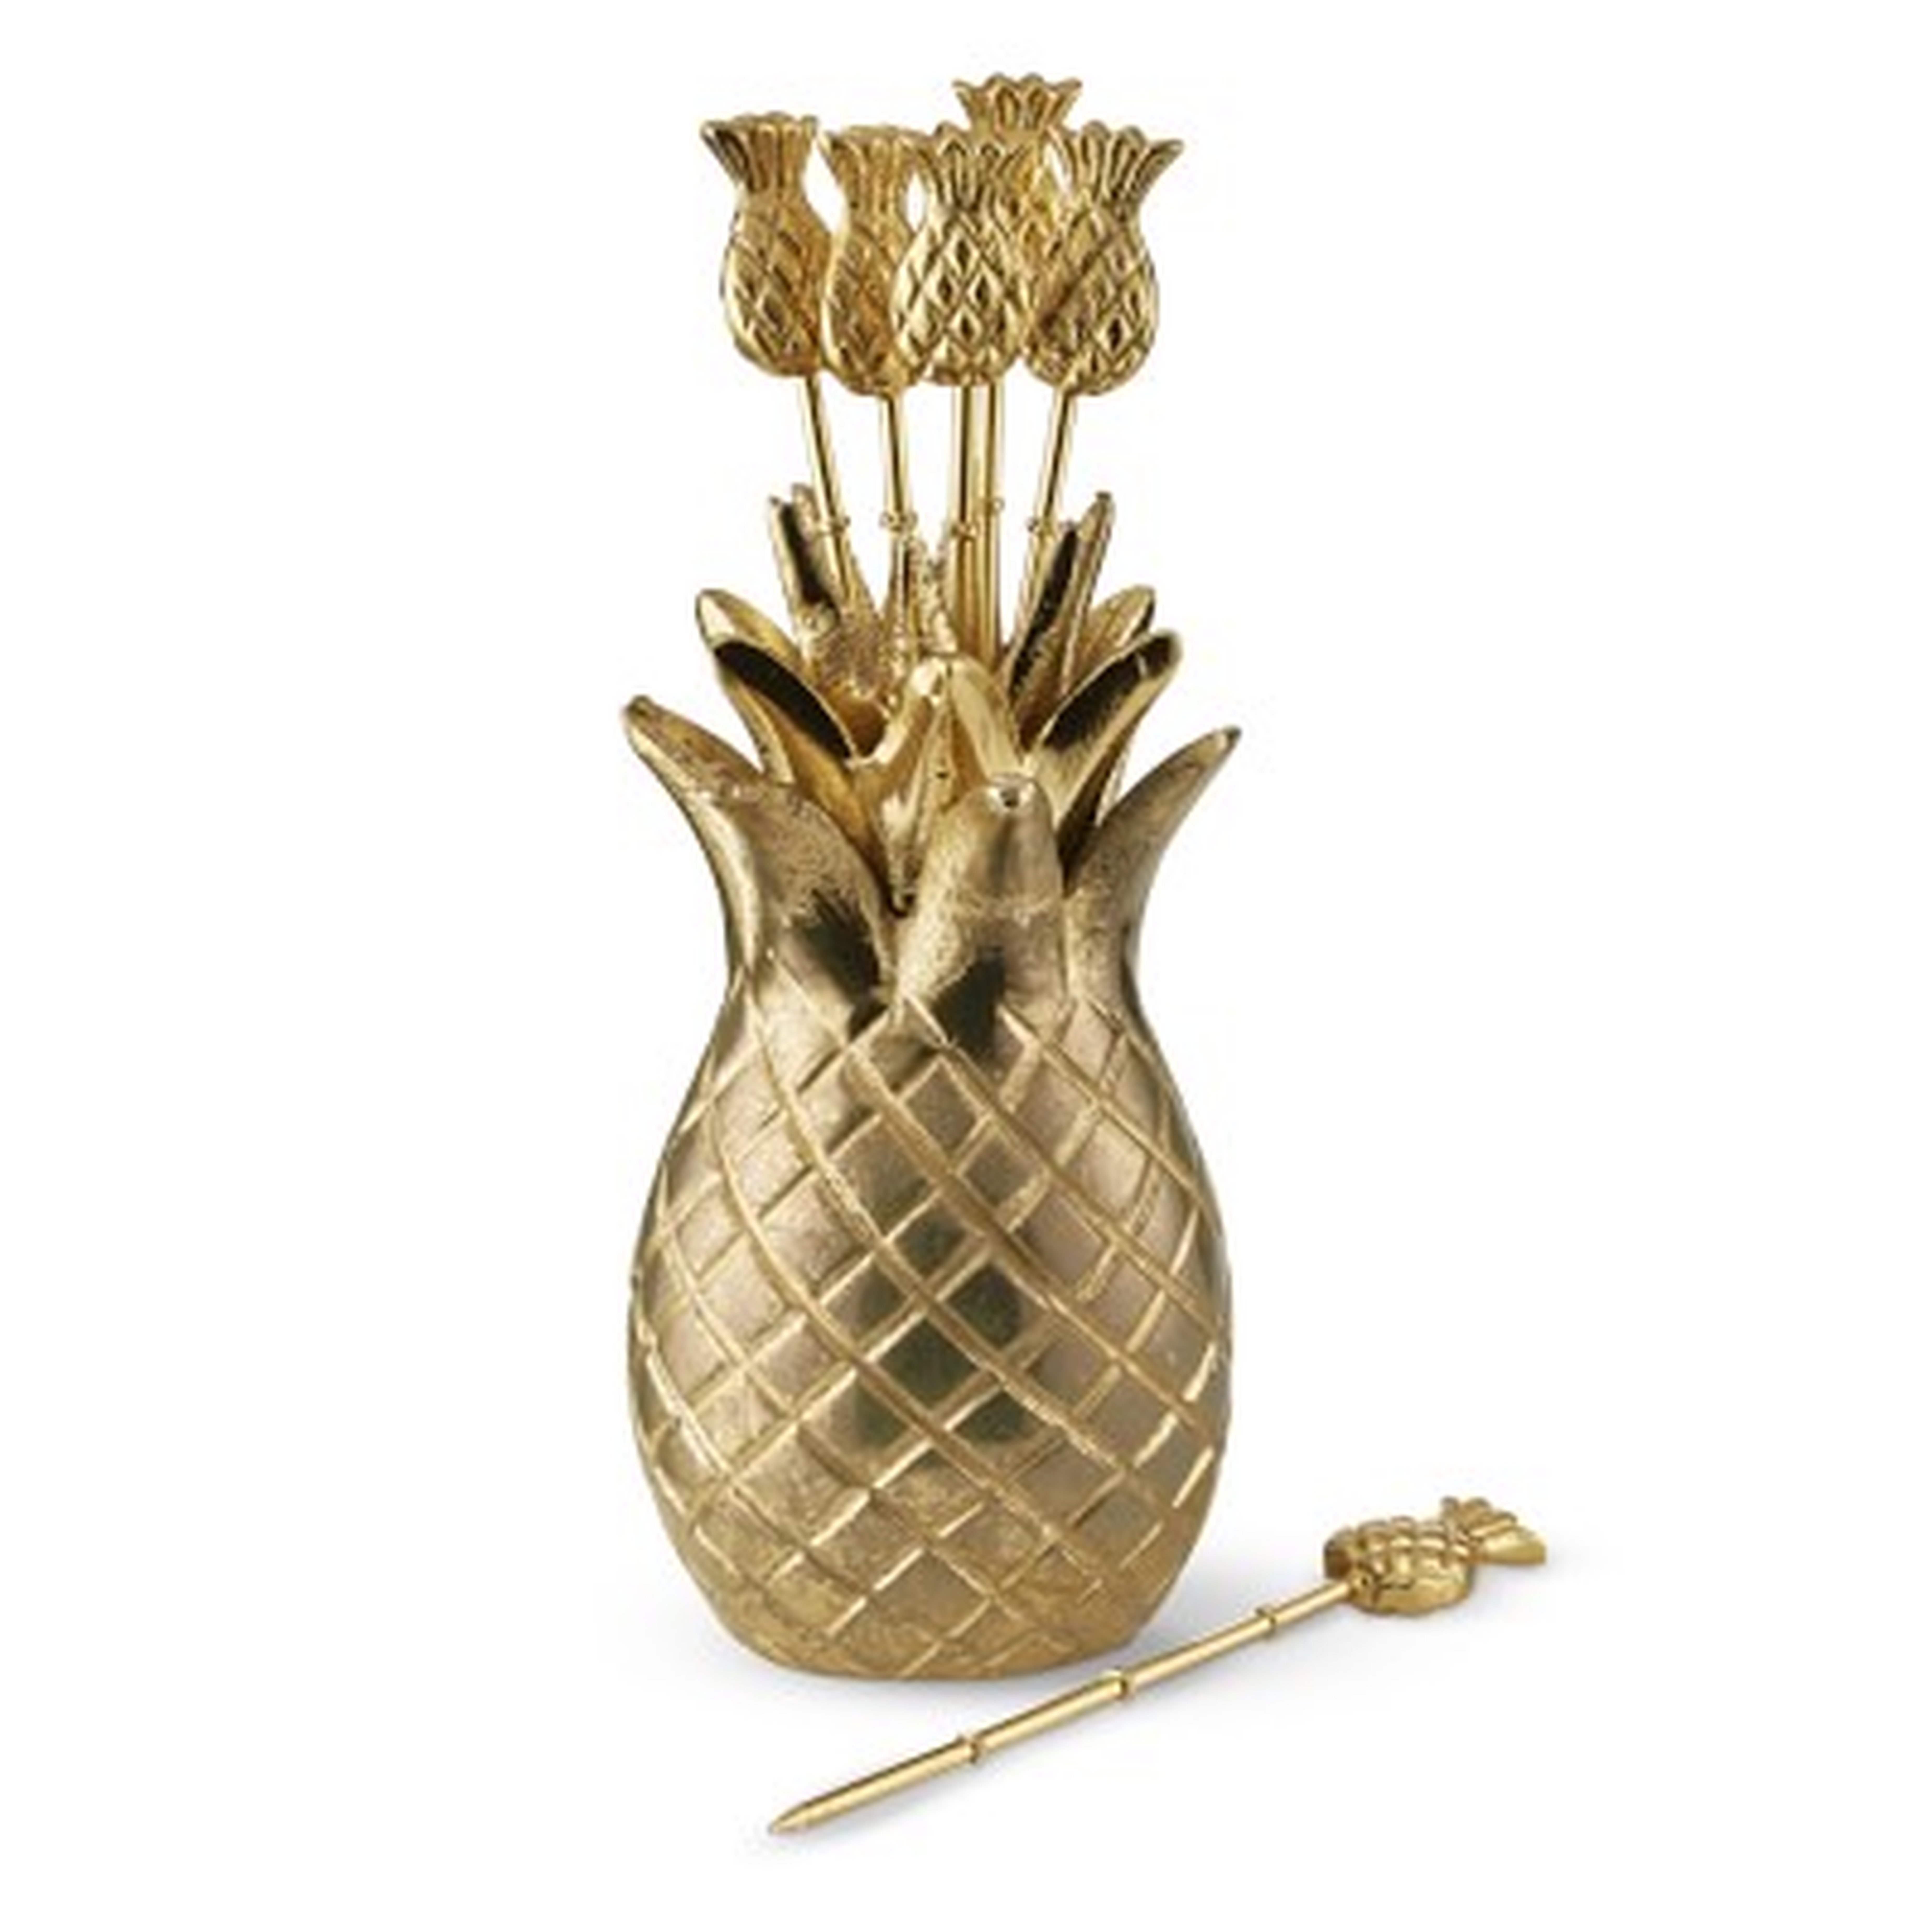 Pineapple Cocktail Picks with Holder, Set of 6 - Williams Sonoma